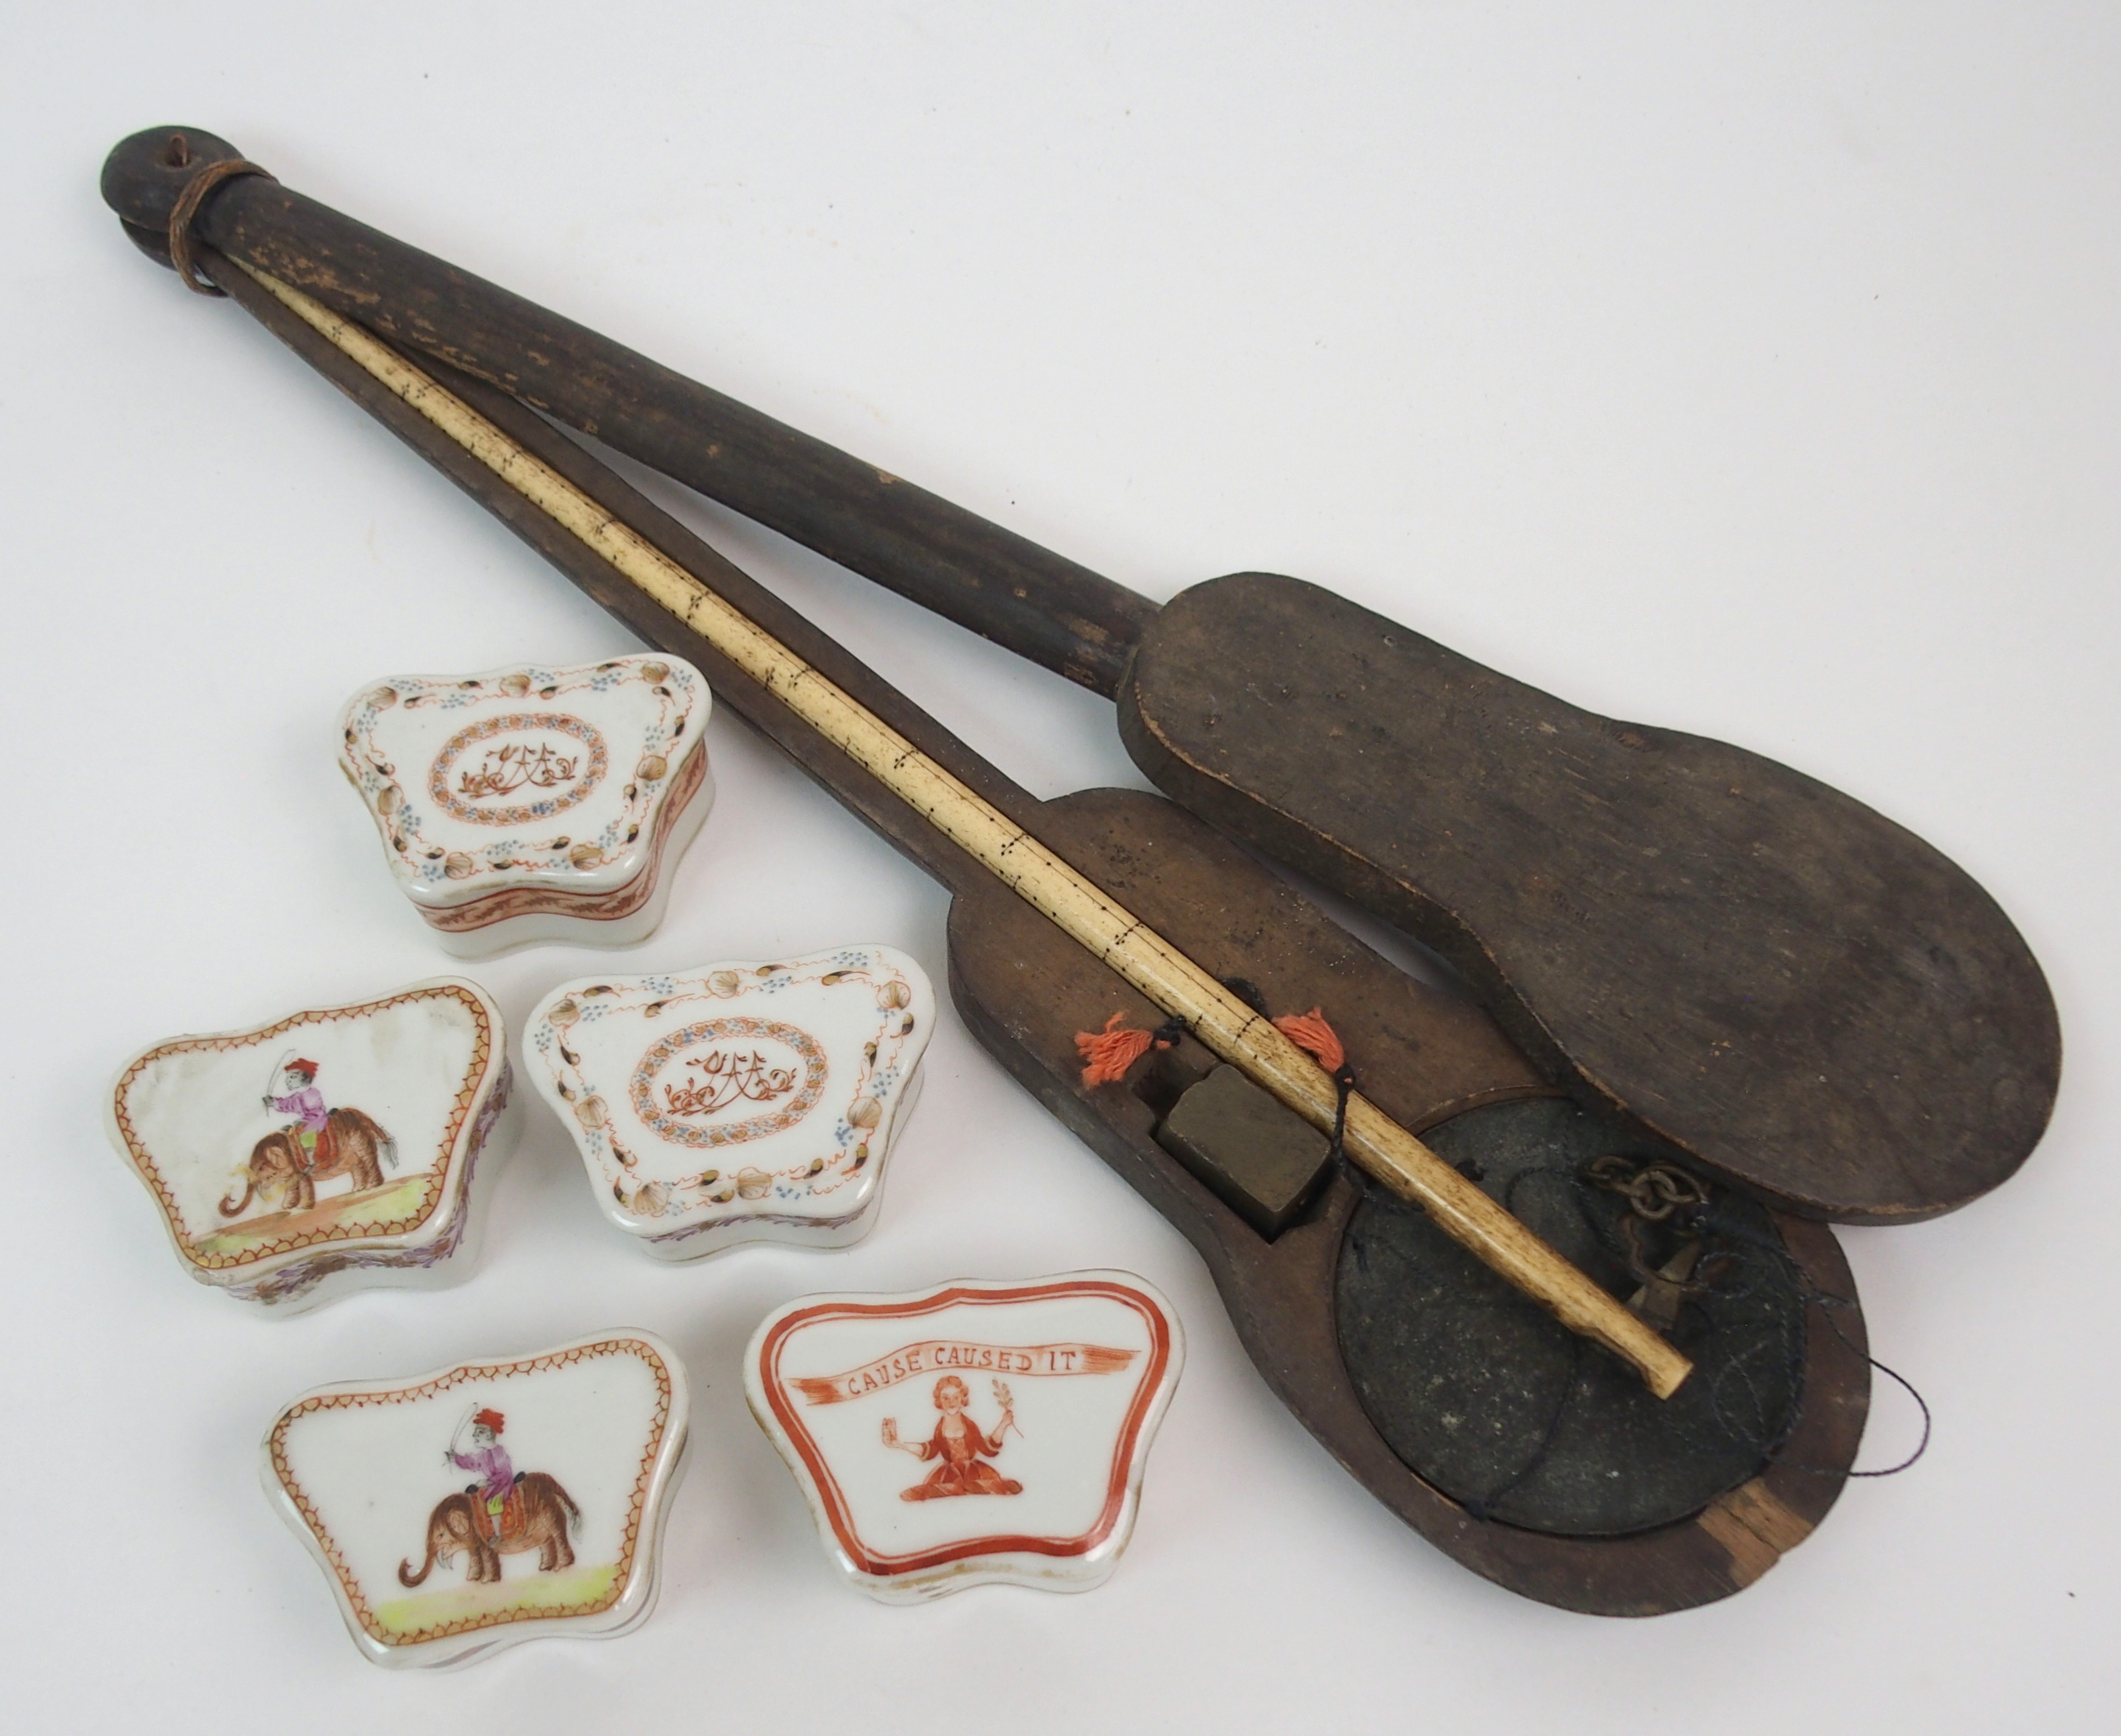 A CHINESE SET OF BONE OPIUM SCALES with metal weight and pans within a boxwood case, 43cm long and